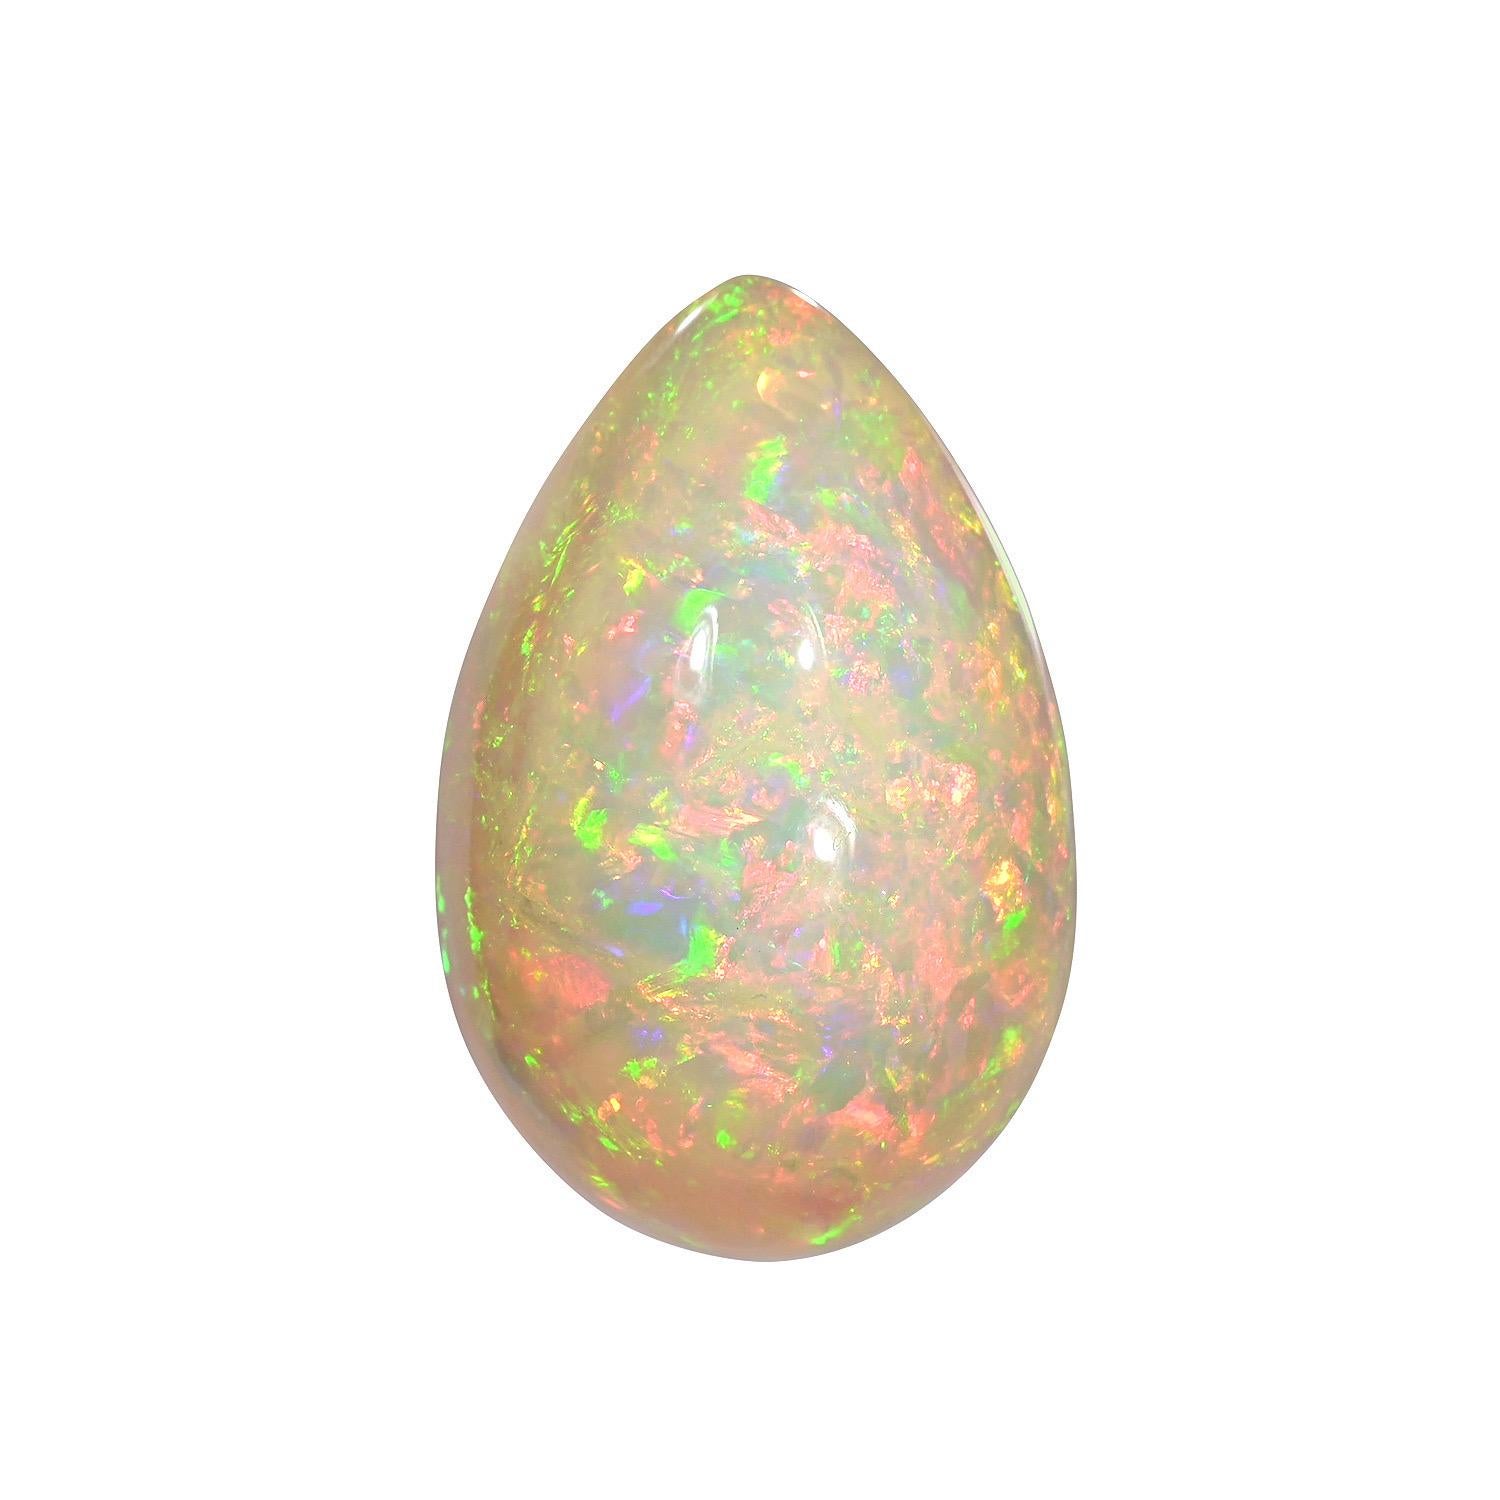 Natural 27.63 carat pear shape Ethiopian Opal loose gemstone, offered unmounted to a fine gem aficionado.
Returns are accepted and paid by us within 7 days of delivery.
We offer supreme custom jewelry work upon request. Please contact us for more